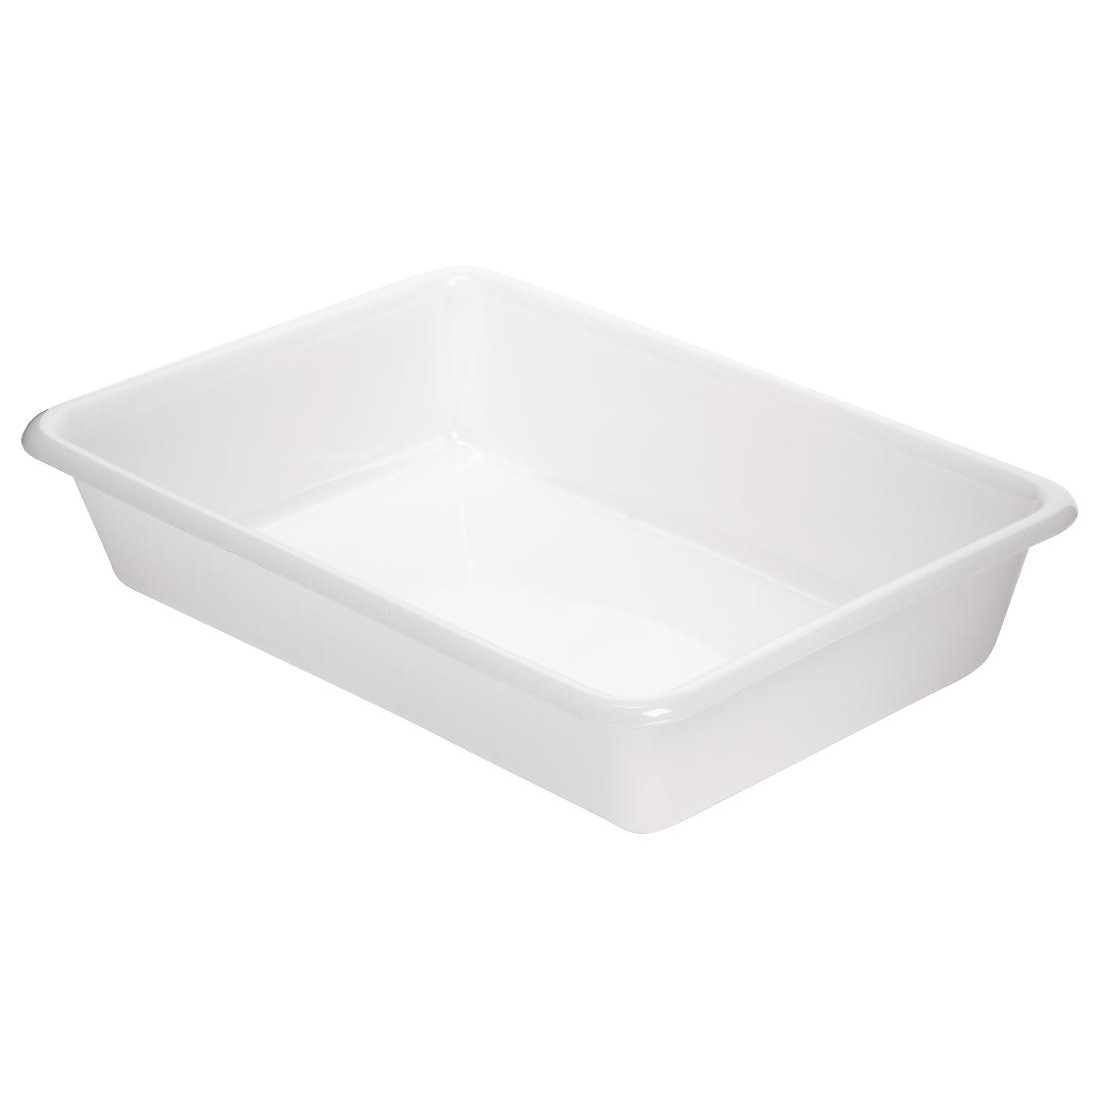 Araven Shallow Food Storage Tray 17in